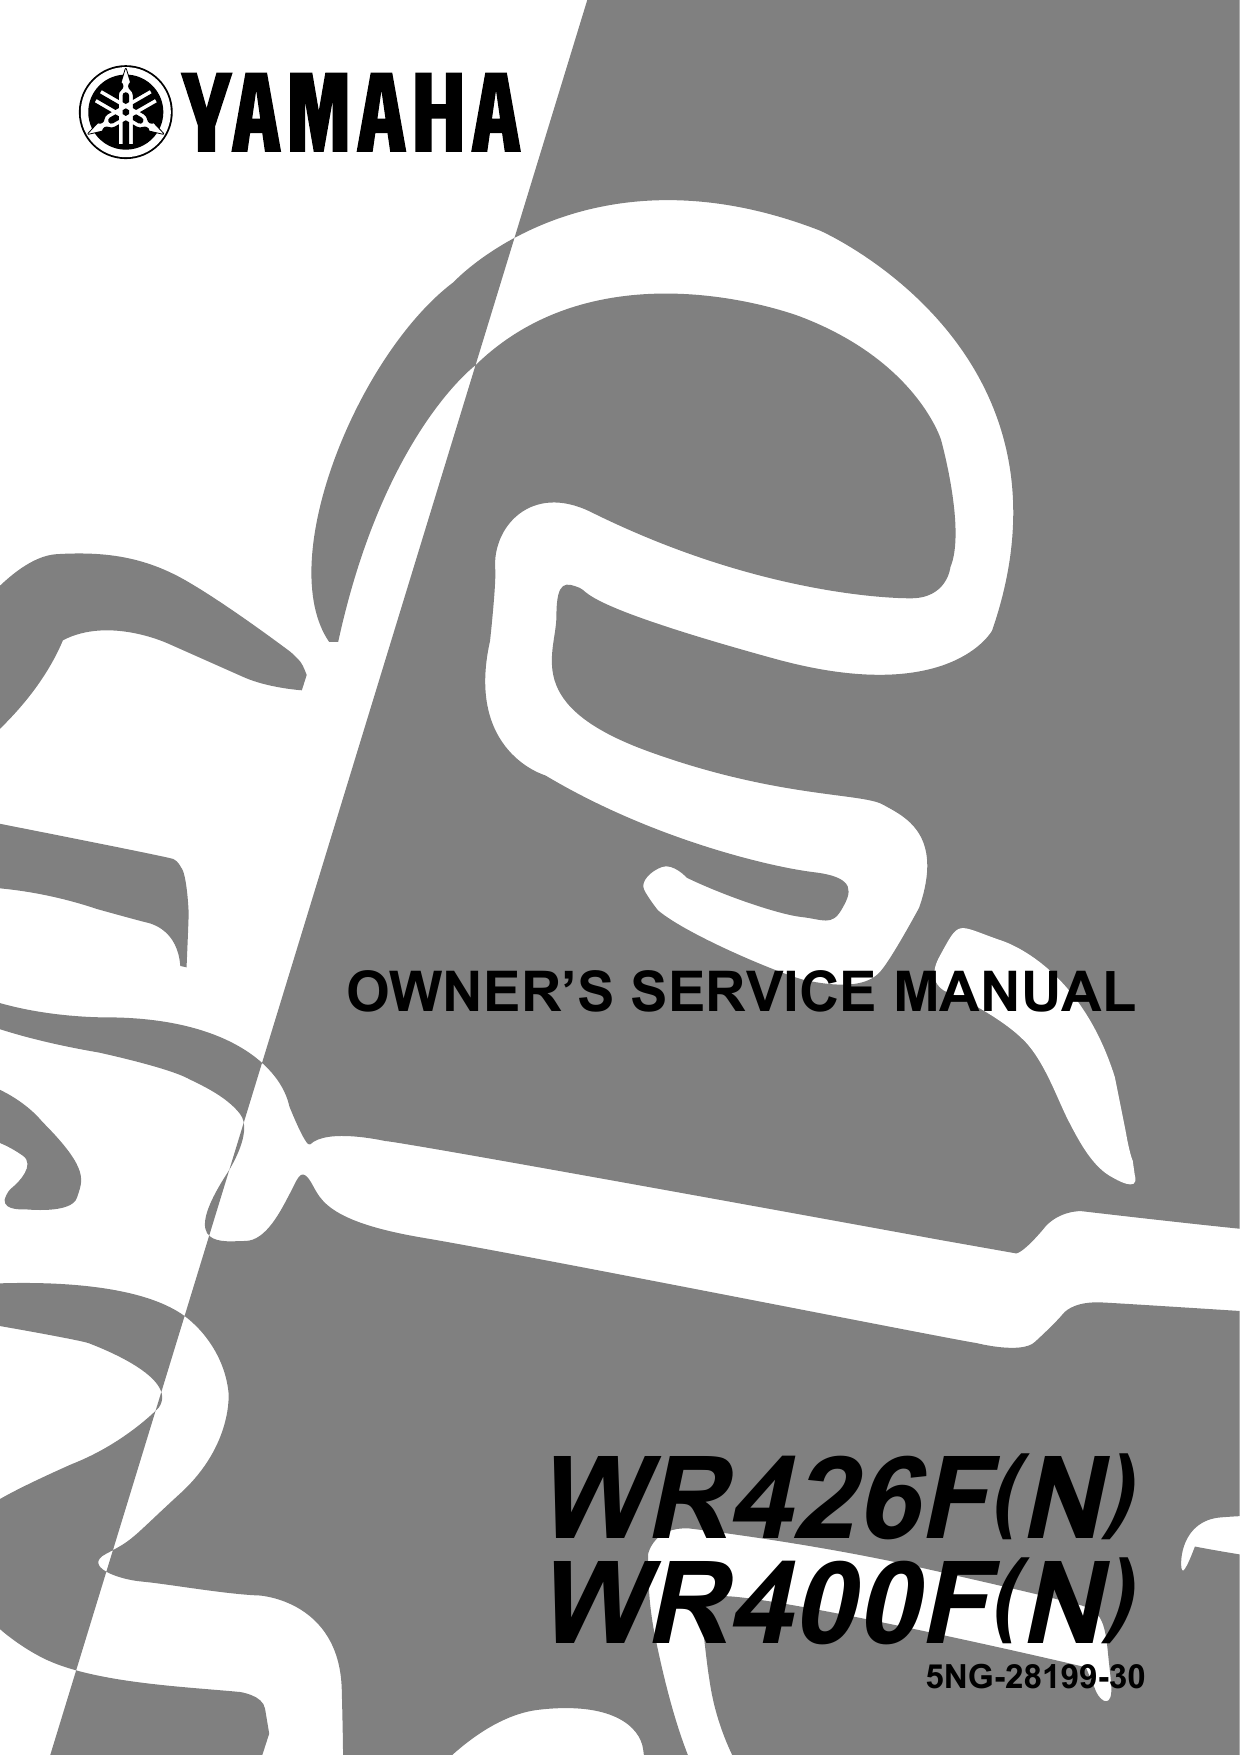 2001 Yamaha WR426, WR426F repair and service manual Preview image 1